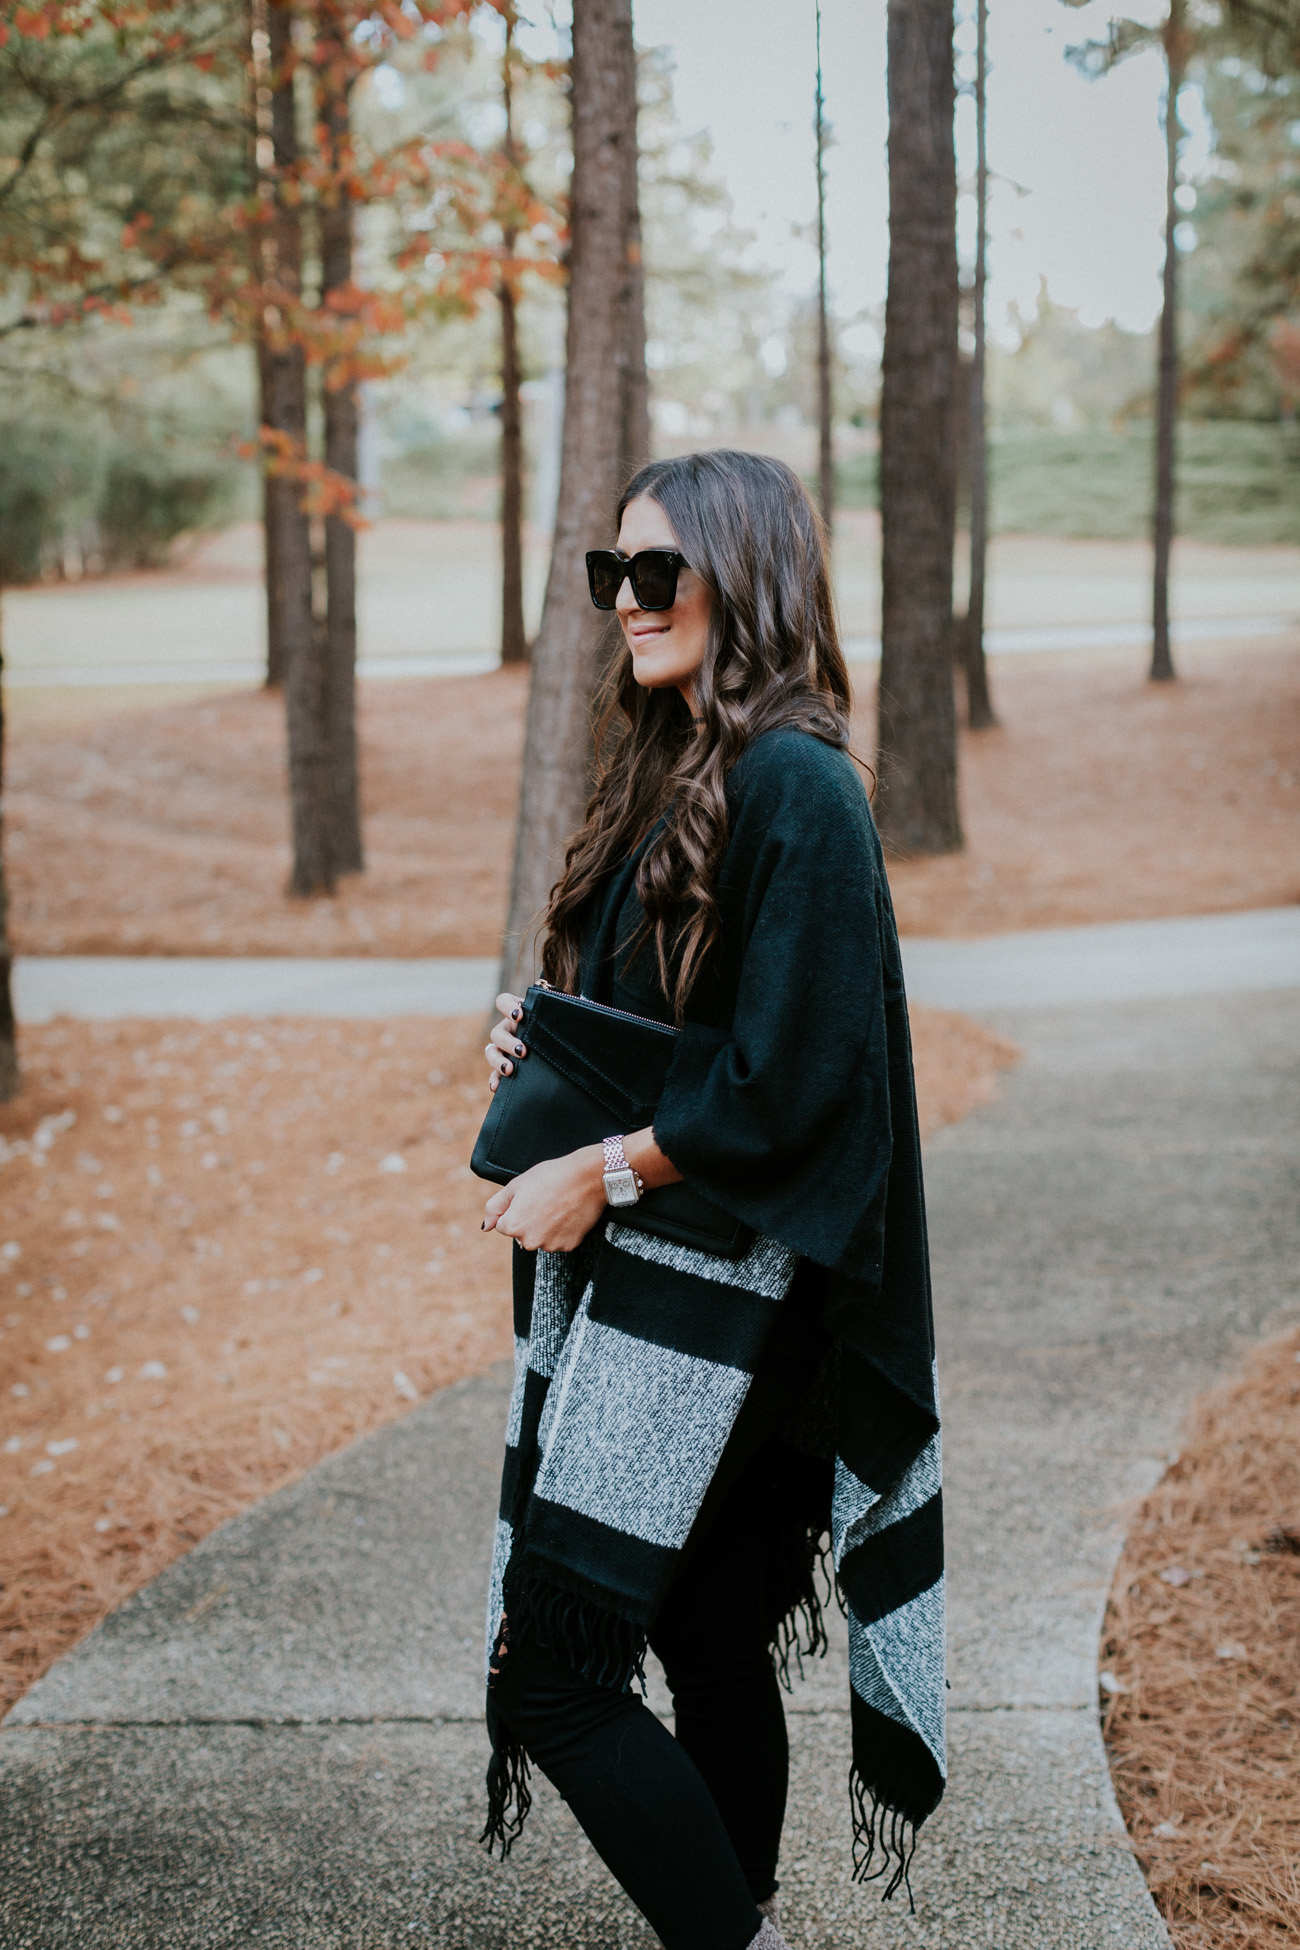 sole society holiday gift guide, sole society sale, sole society gift boxes, sole society poncho, gift sets for her, winter booties, friendsgiving outfit // grace wainwright a southern drawl